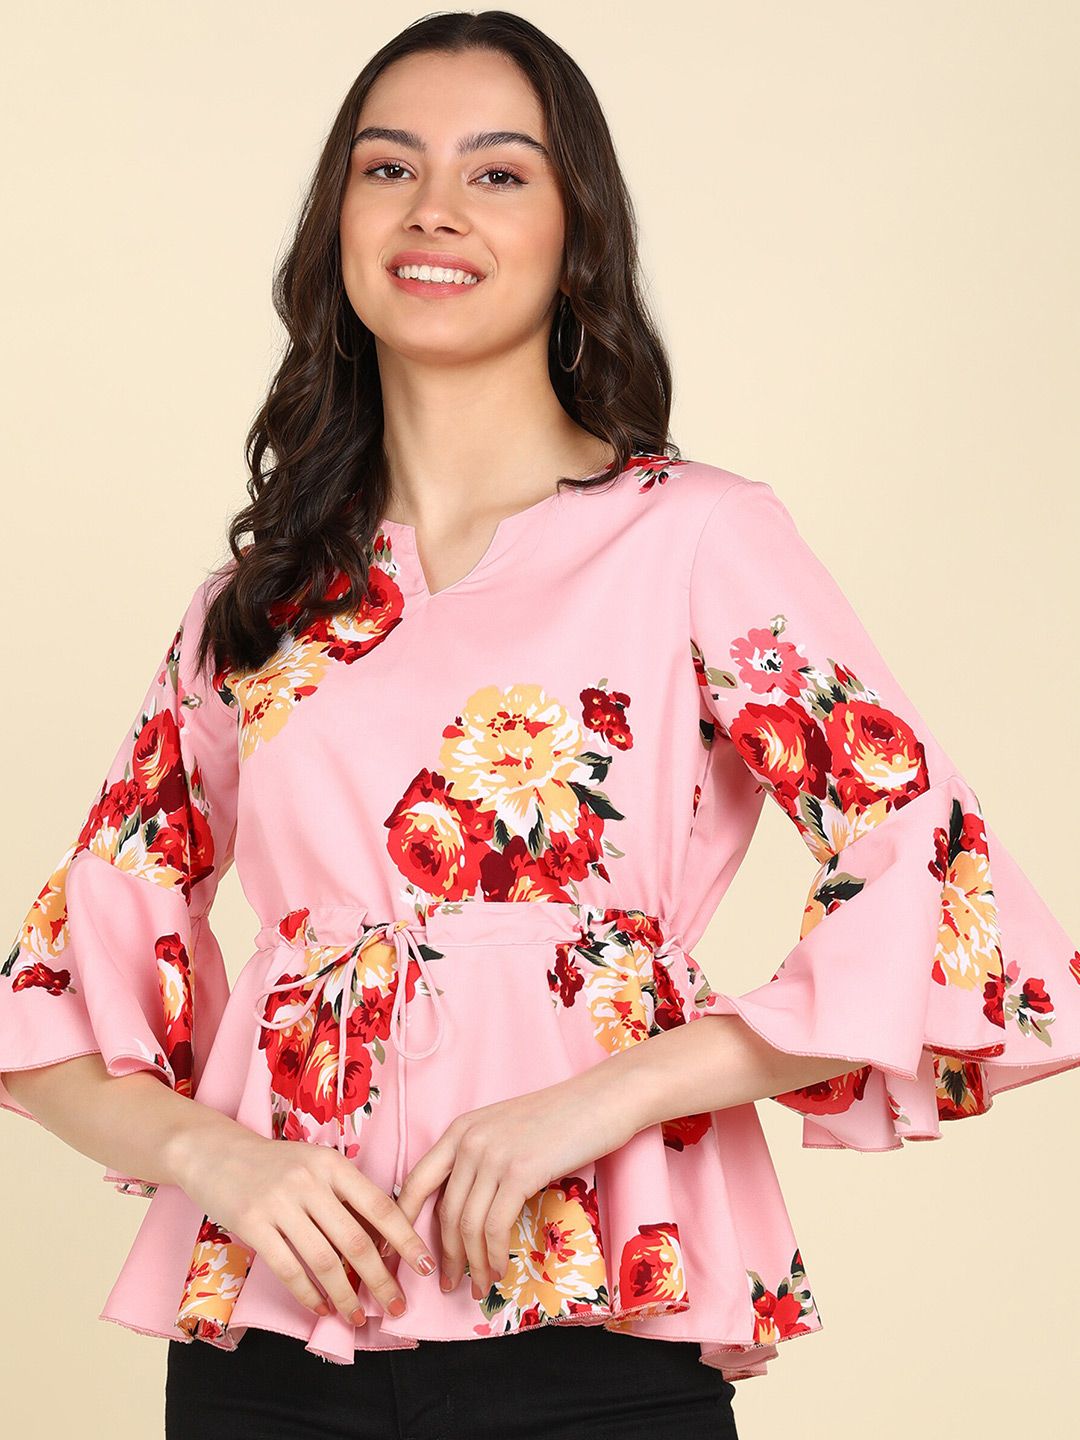 ZNX Clothing Floral Printed Notch Neck Bell Sleeves Empire Top Price in India